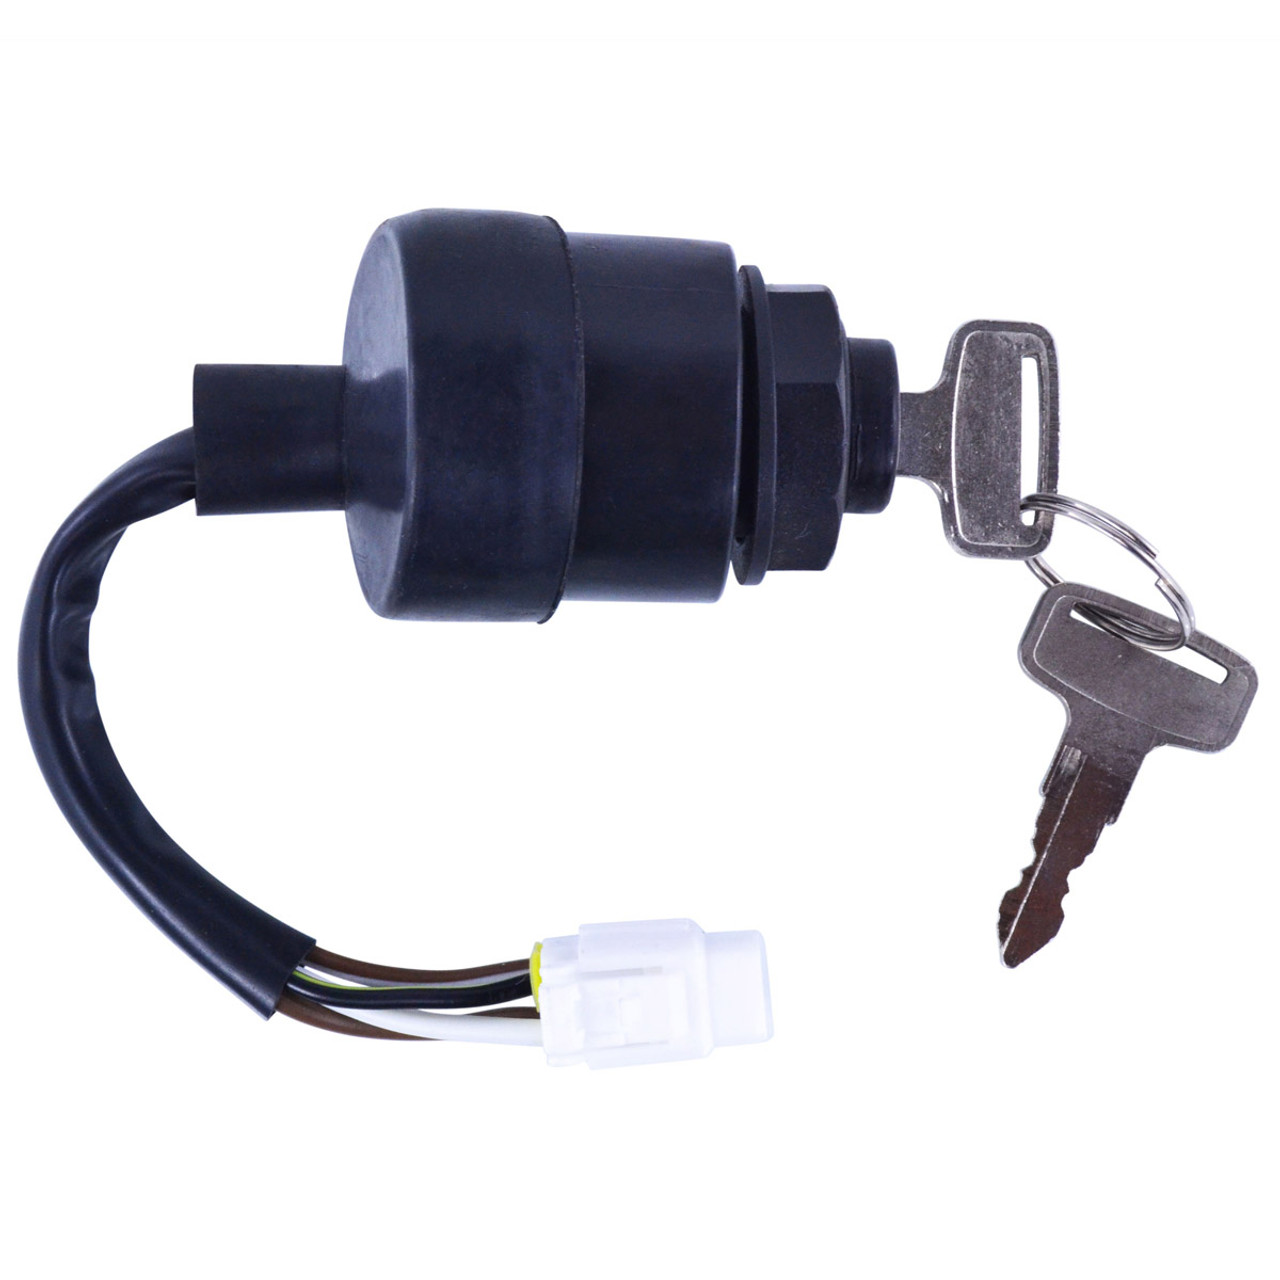 RMSTATOR New Aftermarket Yamaha 3-Position Ignition Key Switch, RMS110-103006